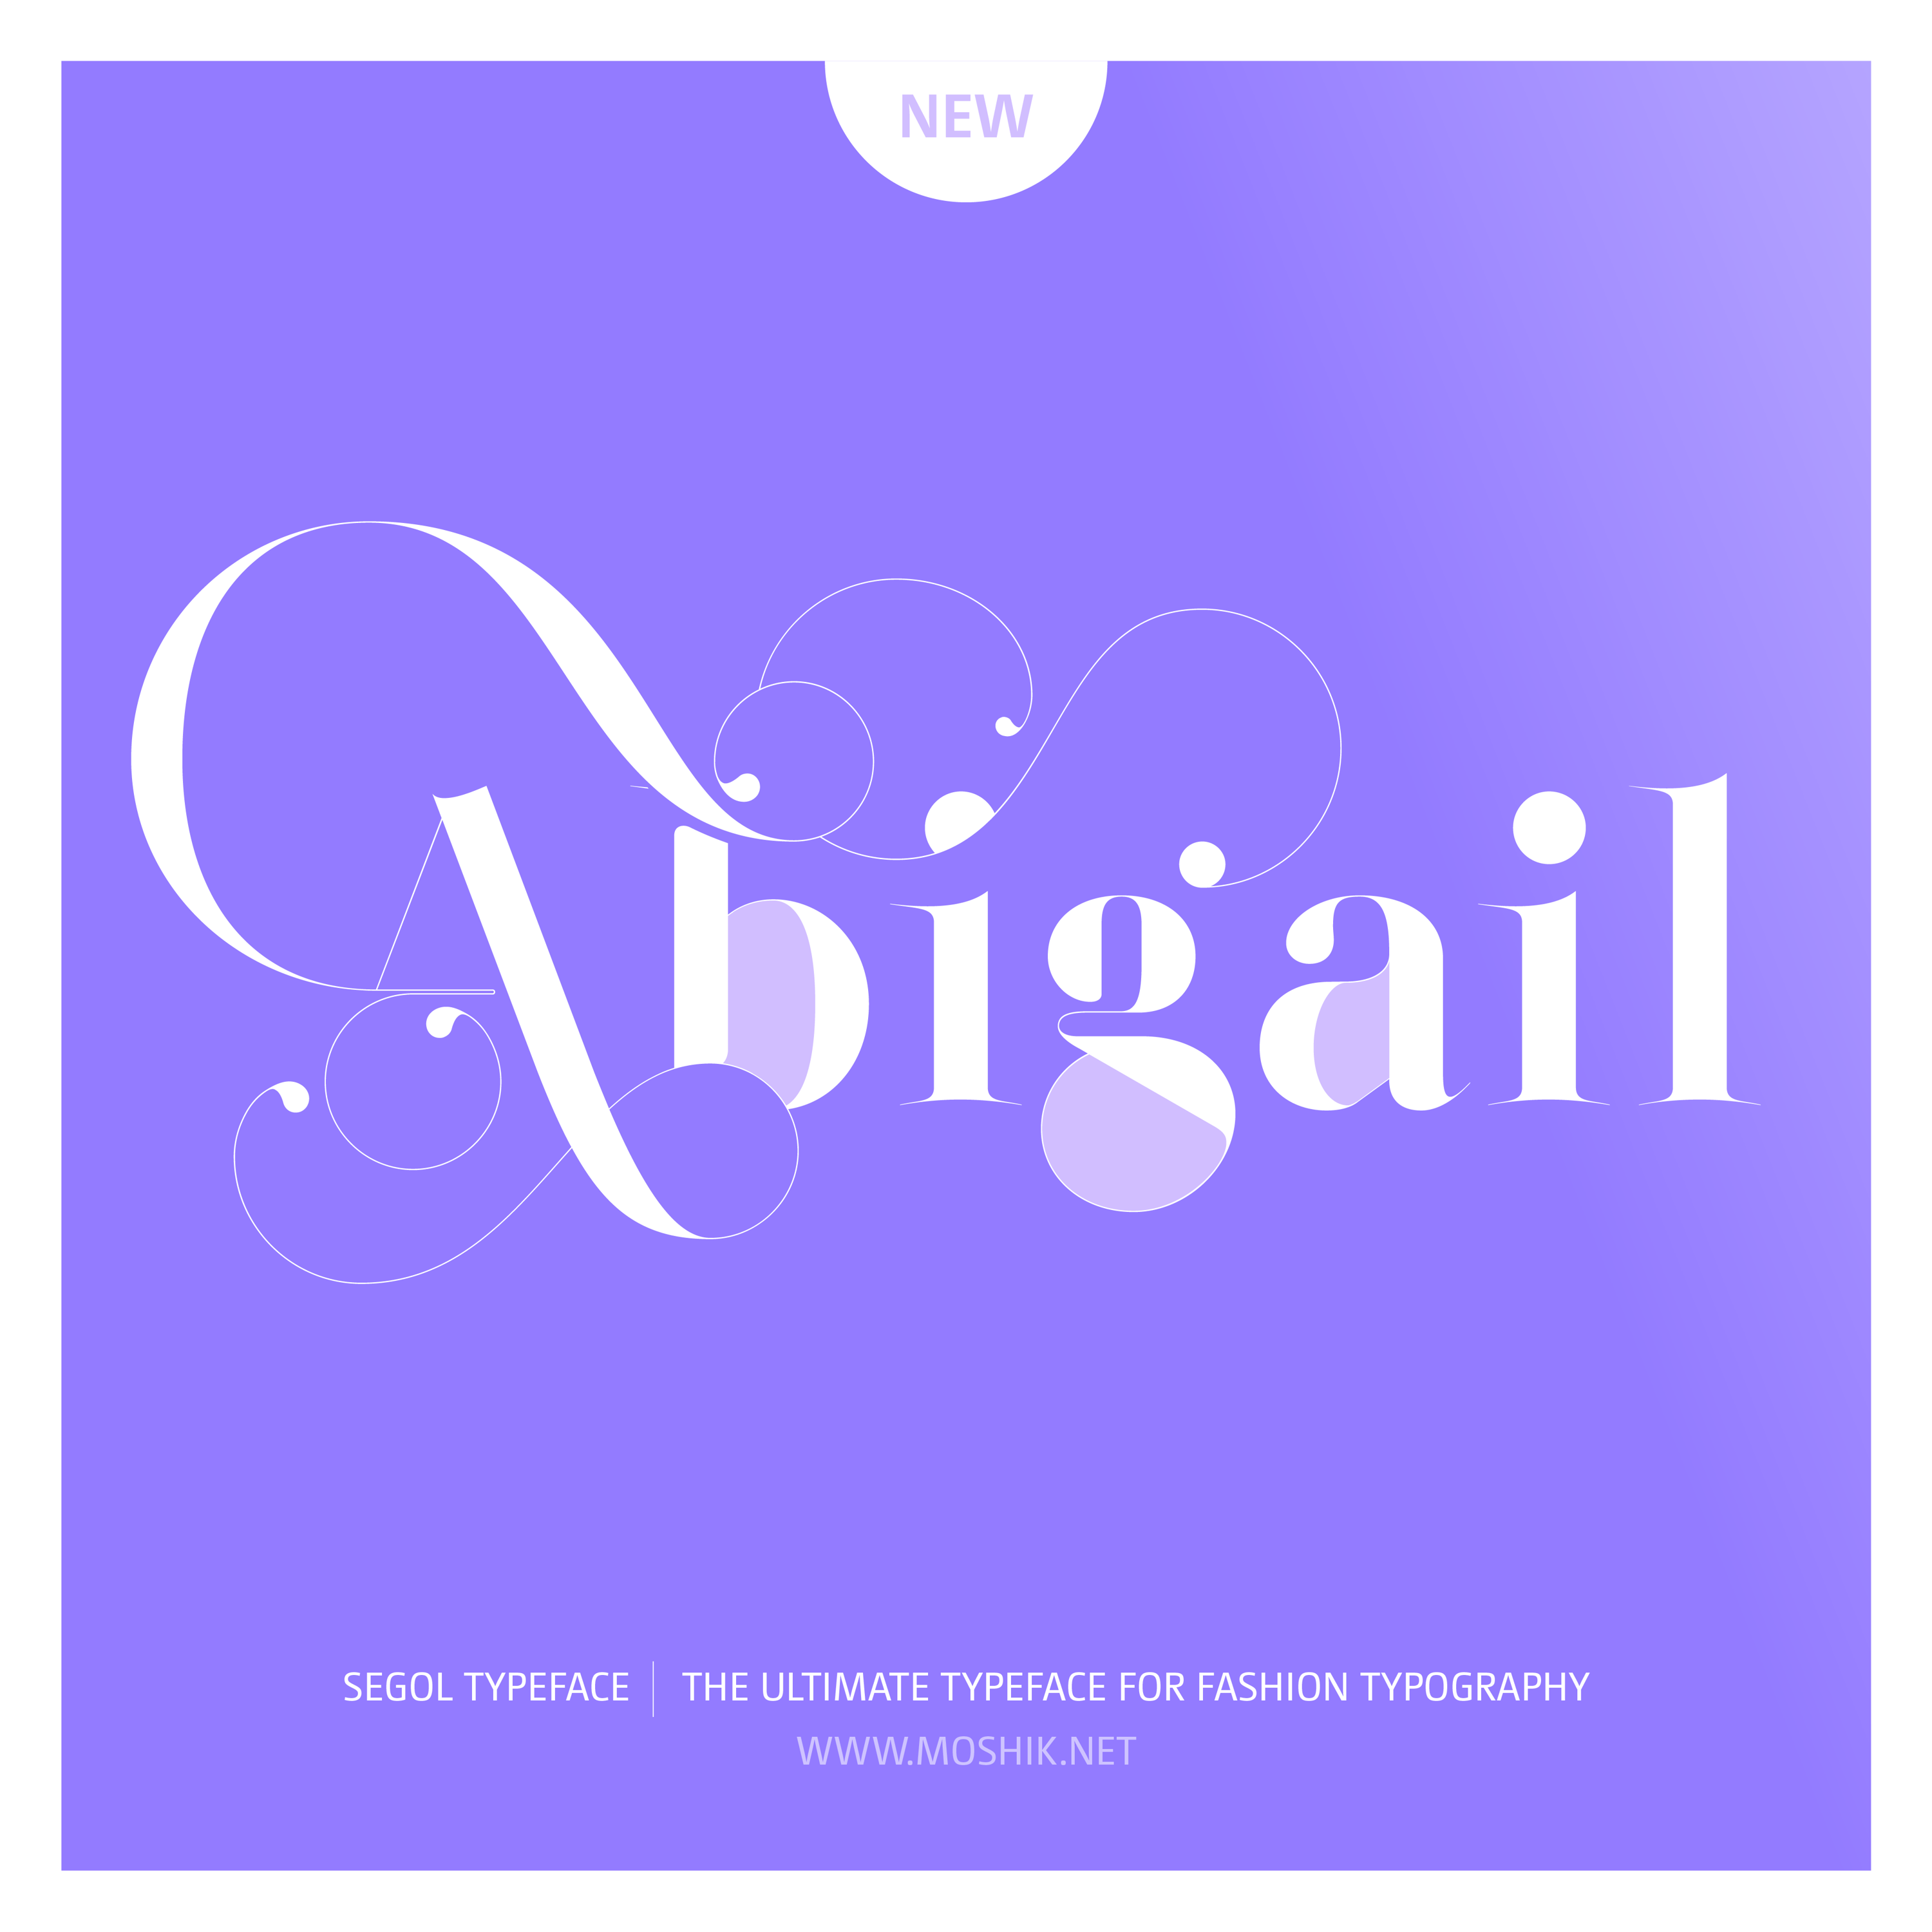 Abigail. Segol Typeface the ultimate font for fashion typography and fonts by Moshik Nadav